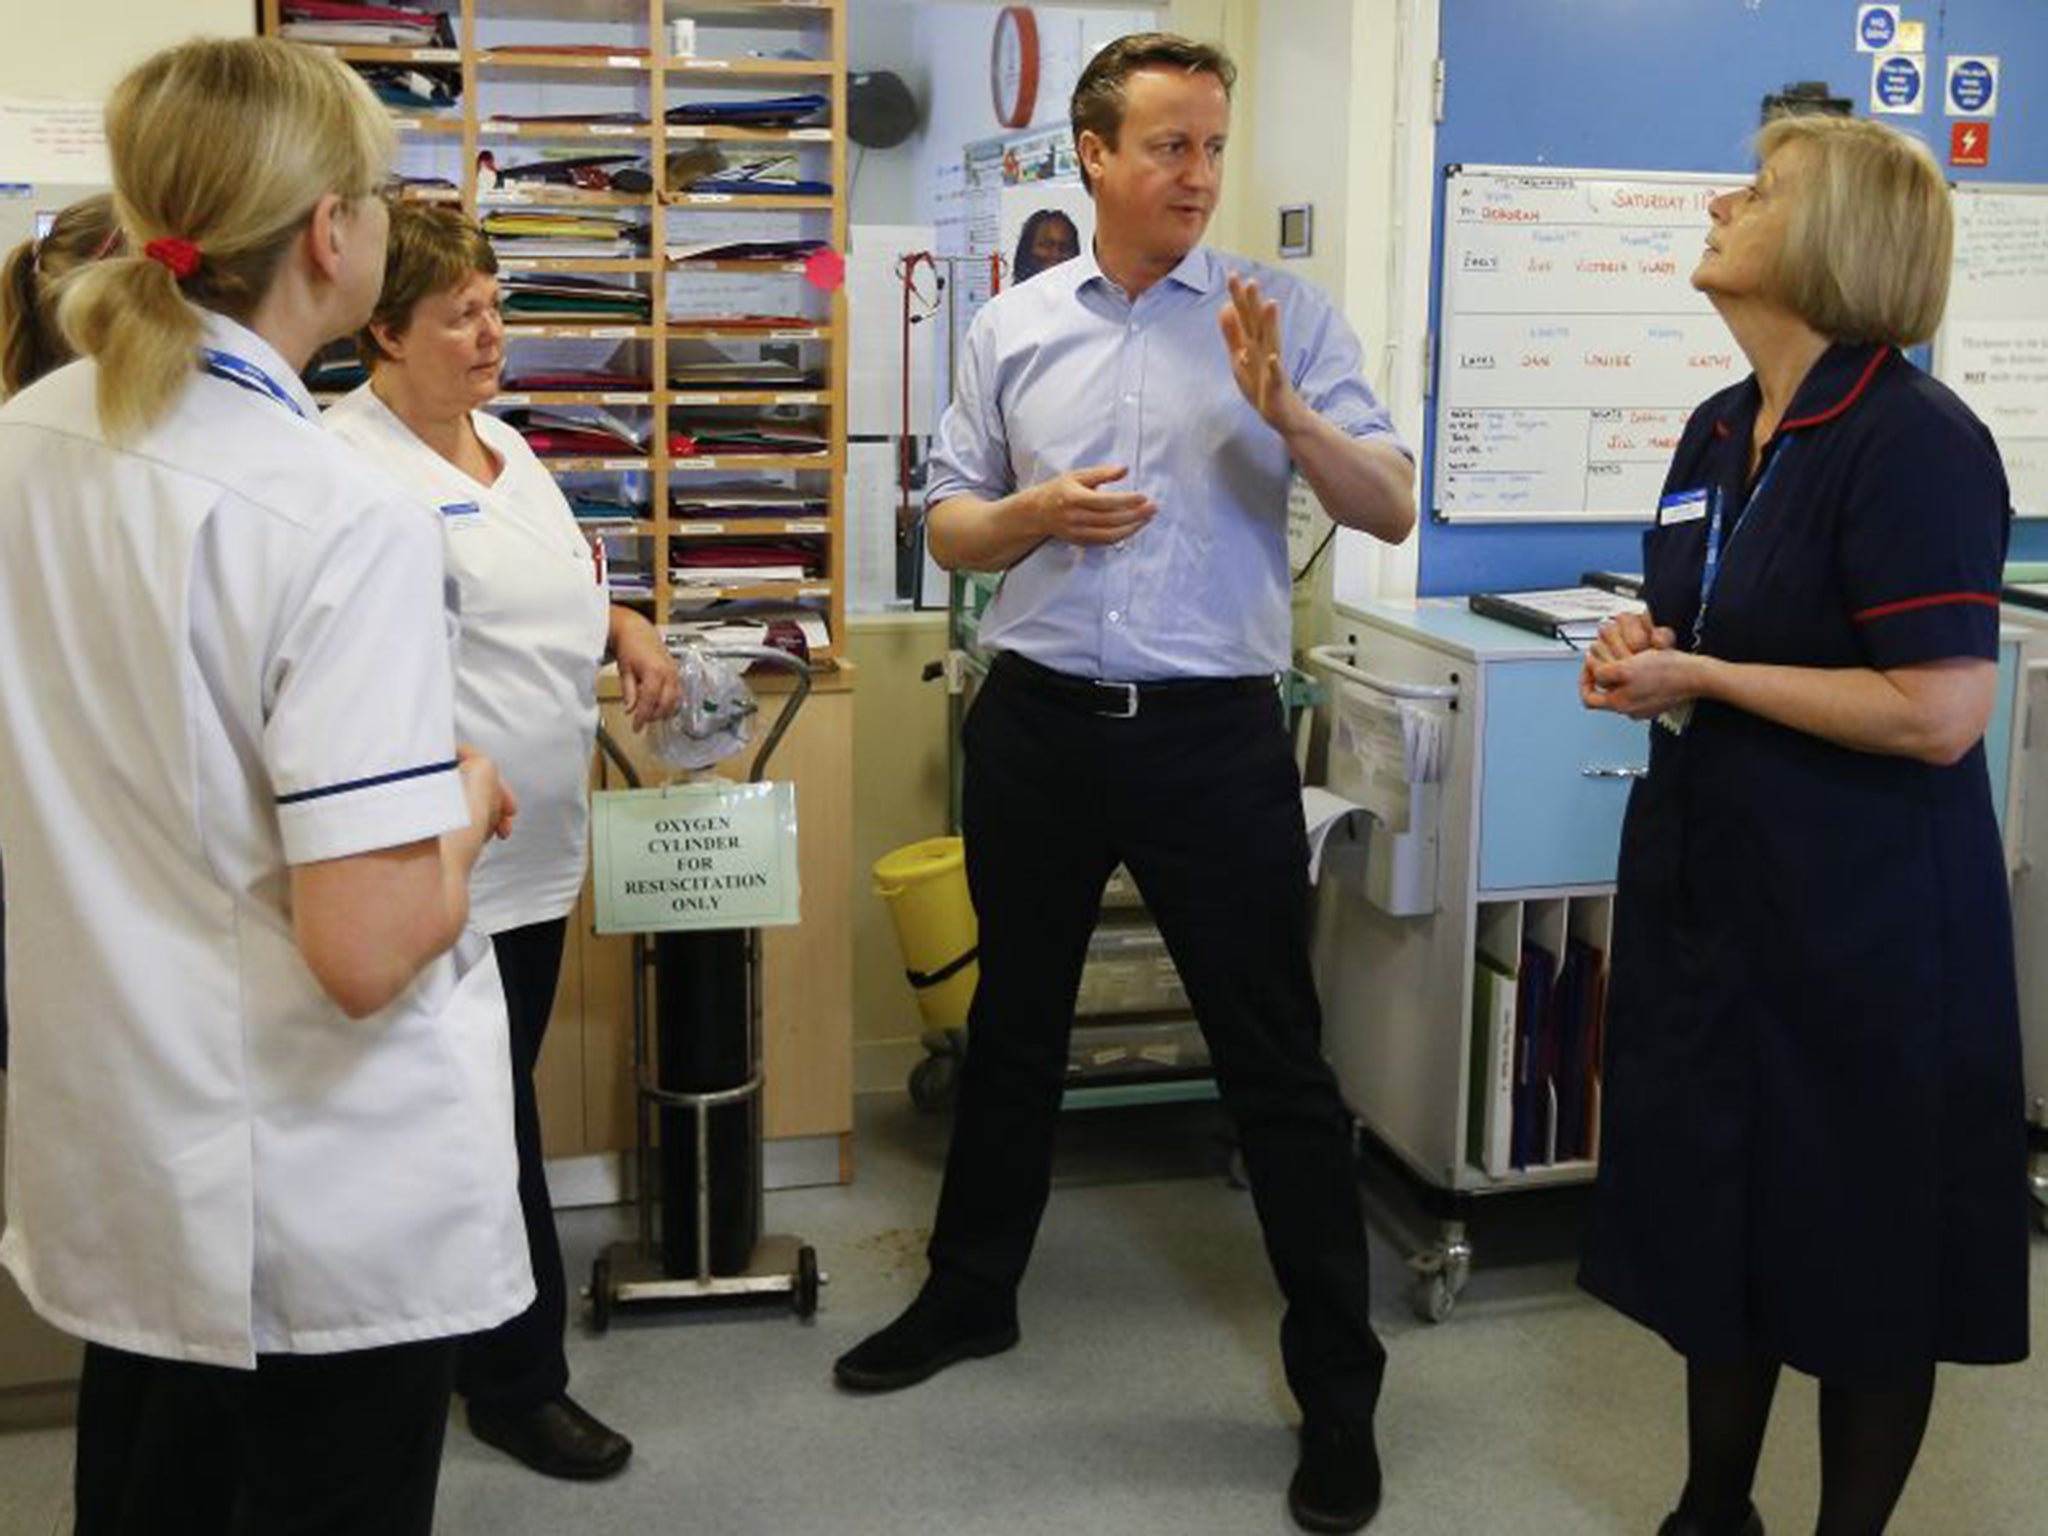 &#13;
The NHS is in a critical condition &#13;